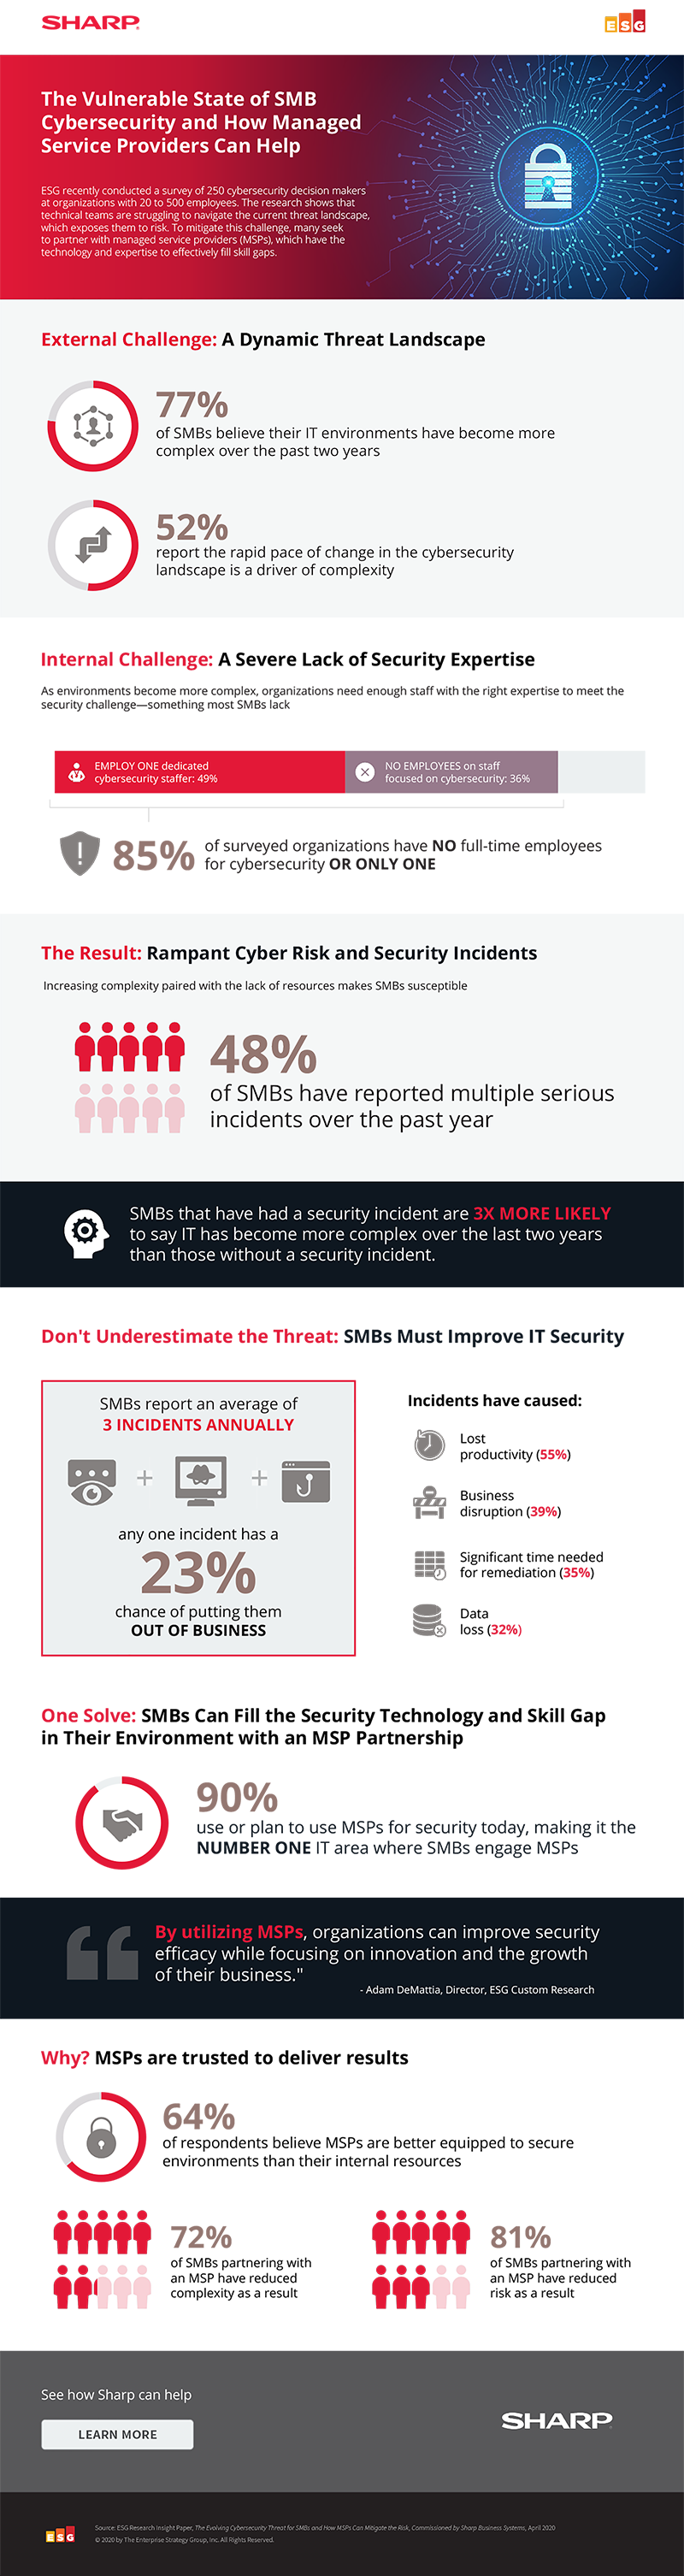 The Vulnerable State of SMB Cybersecurity and How Managed Service Providers Can Help infographic with text version below